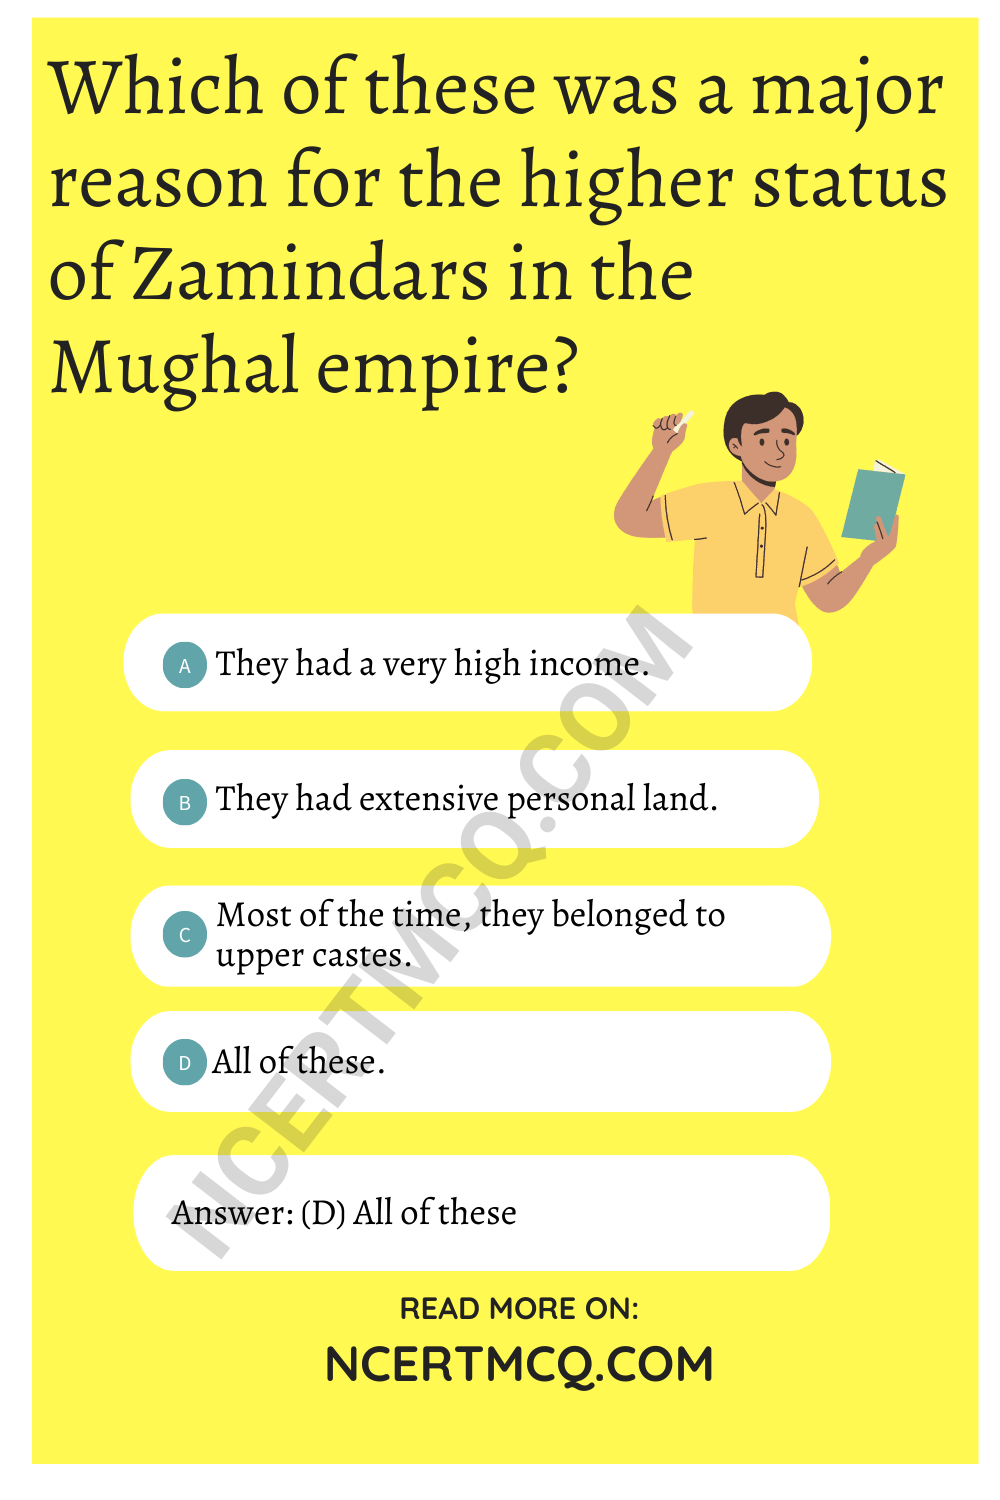 Which of these was a major reason for the higher status of Zamindars in the Mughal empire?